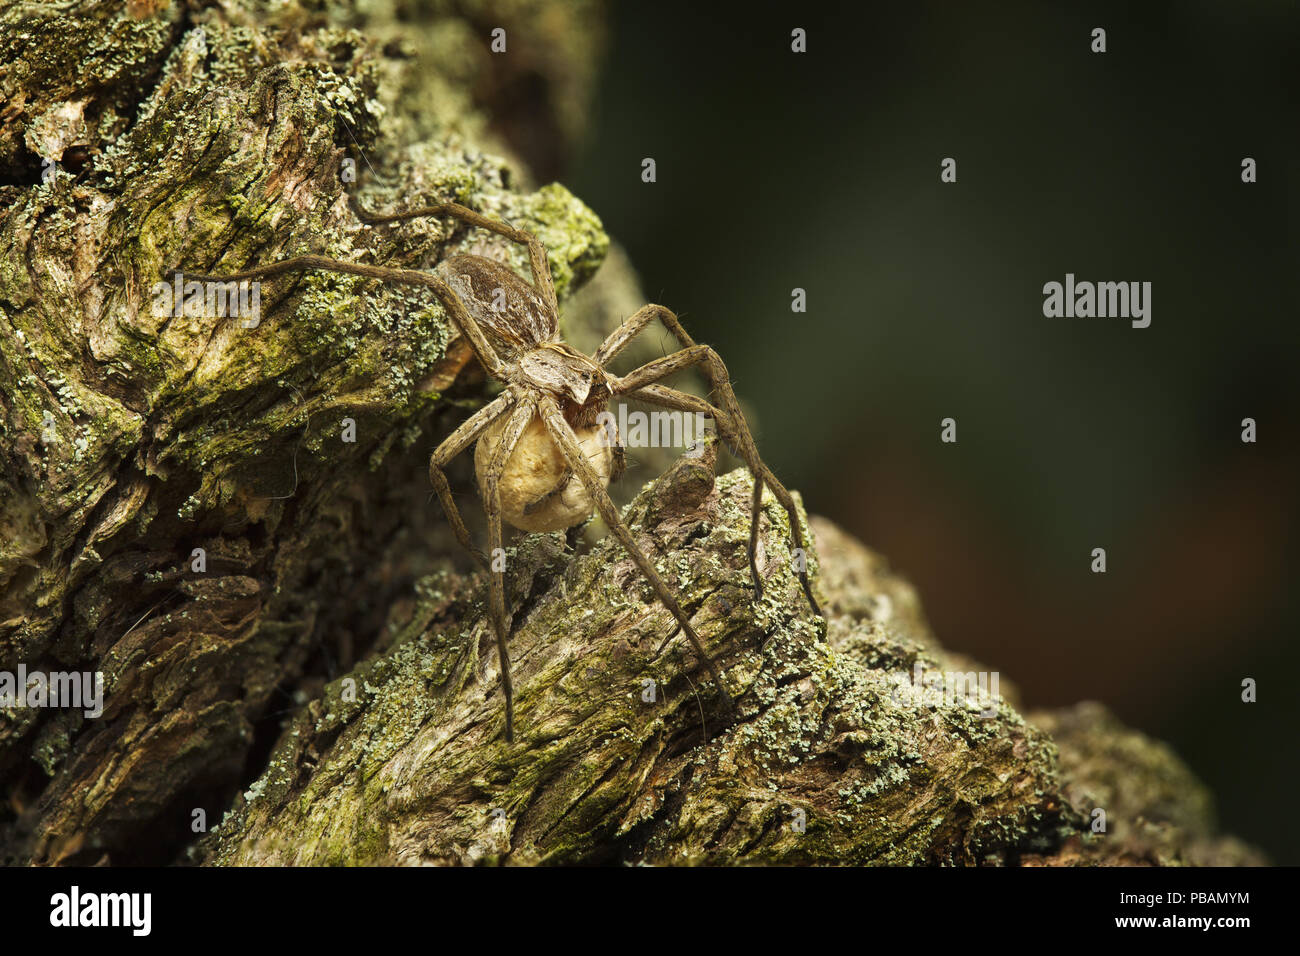 A nursery web spider carrying her egg sack. Stock Photo